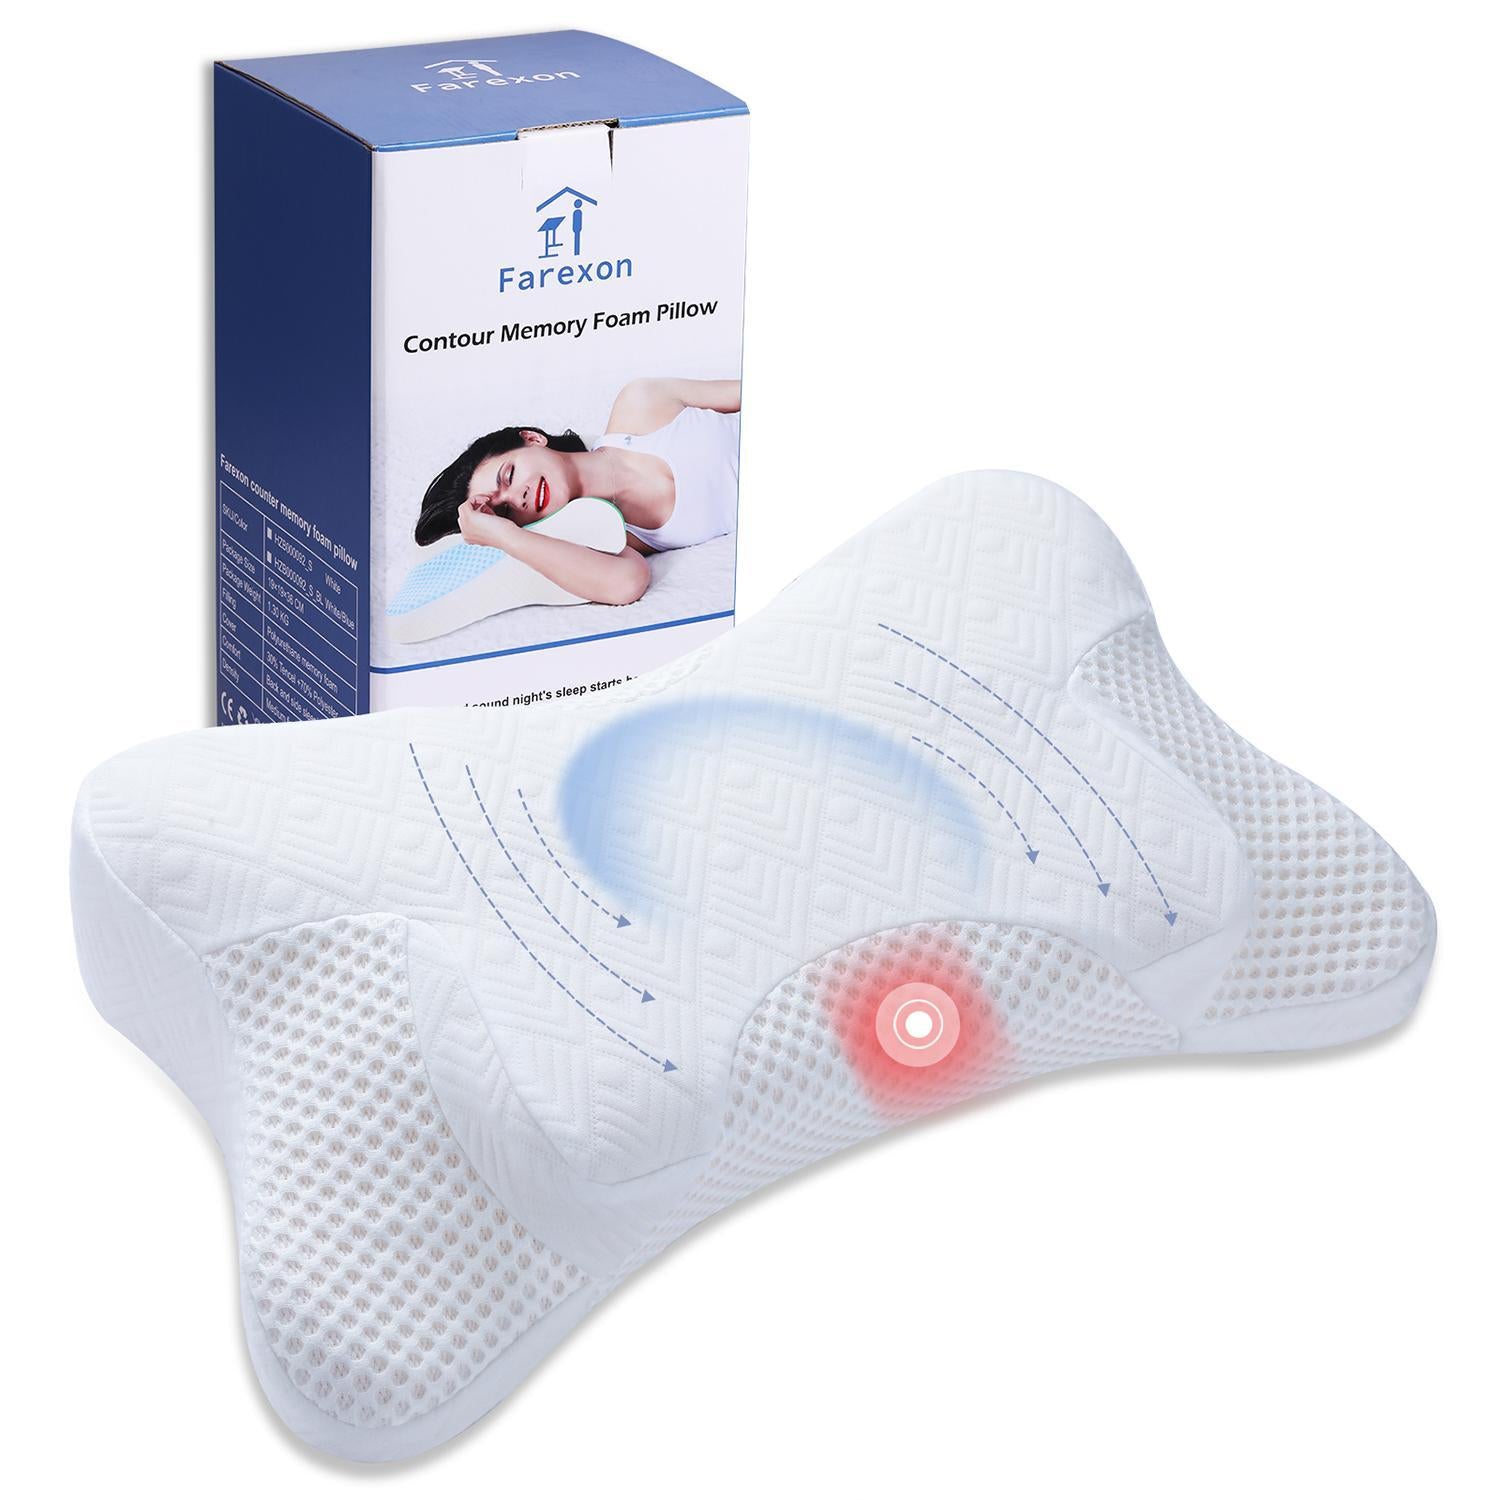 Adjustable Cervical Memory Foam Pillow, Odorless Neck Pillows for Pain Relief, Orthopedic Contour Pillows for Sleeping with Pillowcase, Bed Support Pillow for Side, Back, Stomach Sleeper